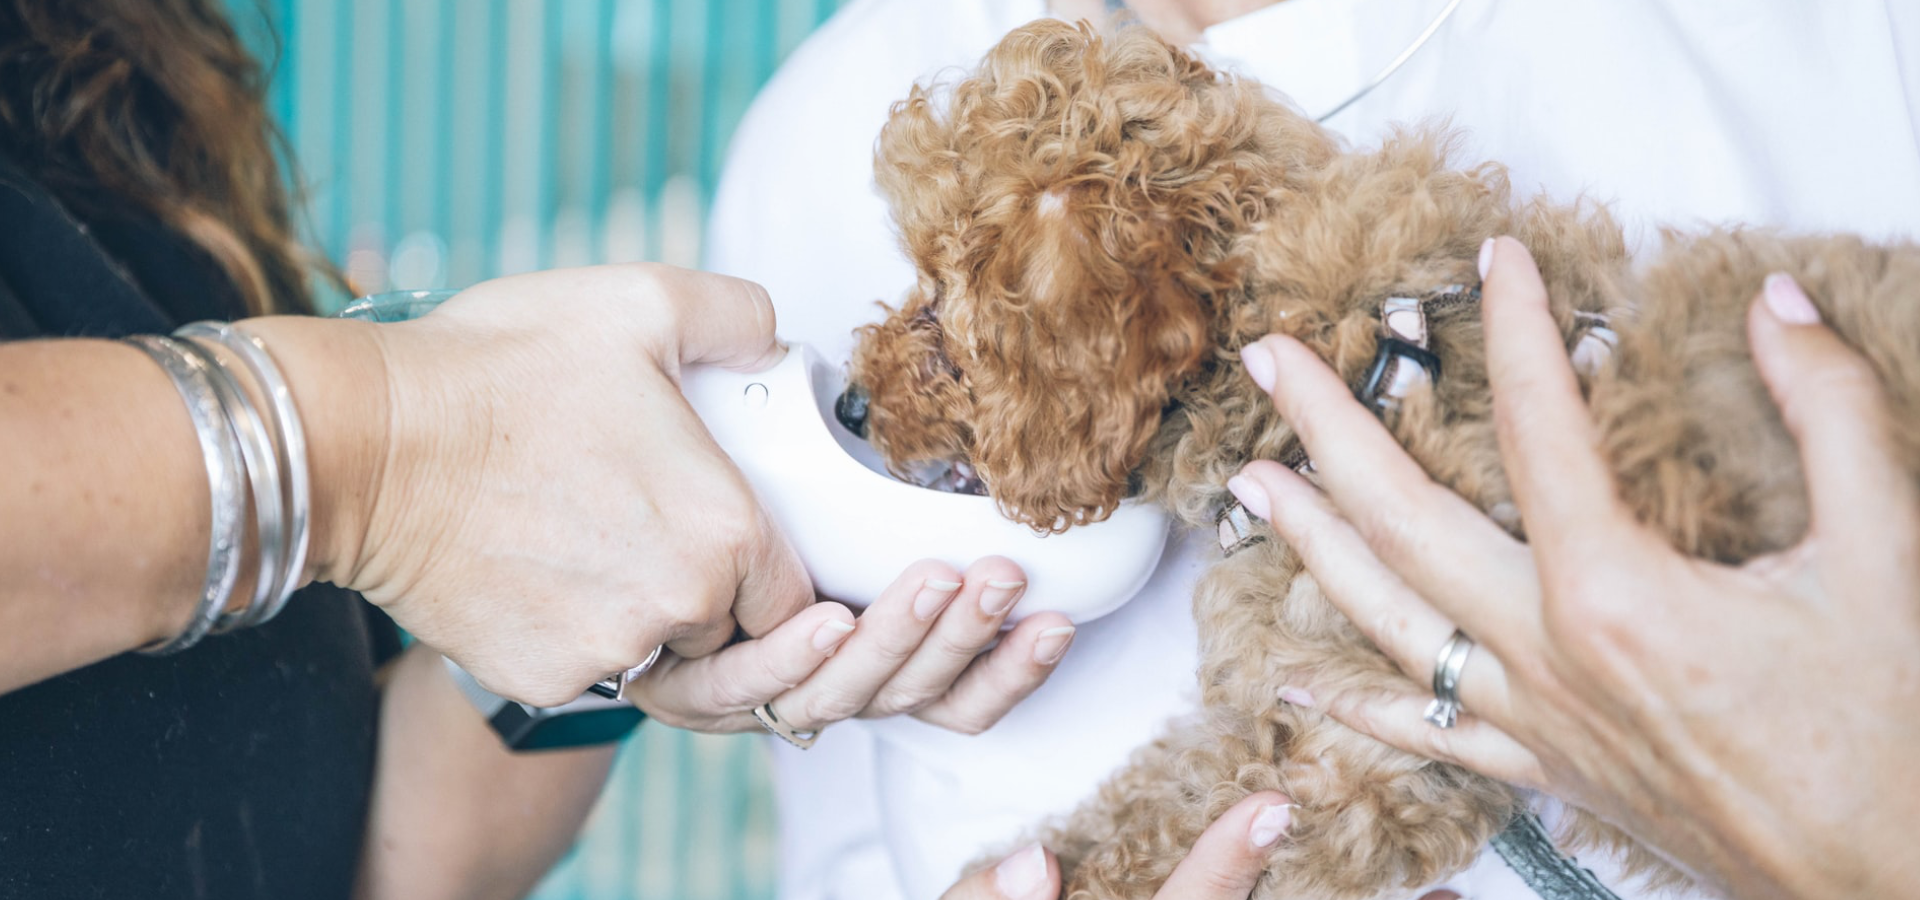 What criteria do veterinarians use to prescribe antimicrobials to pets?